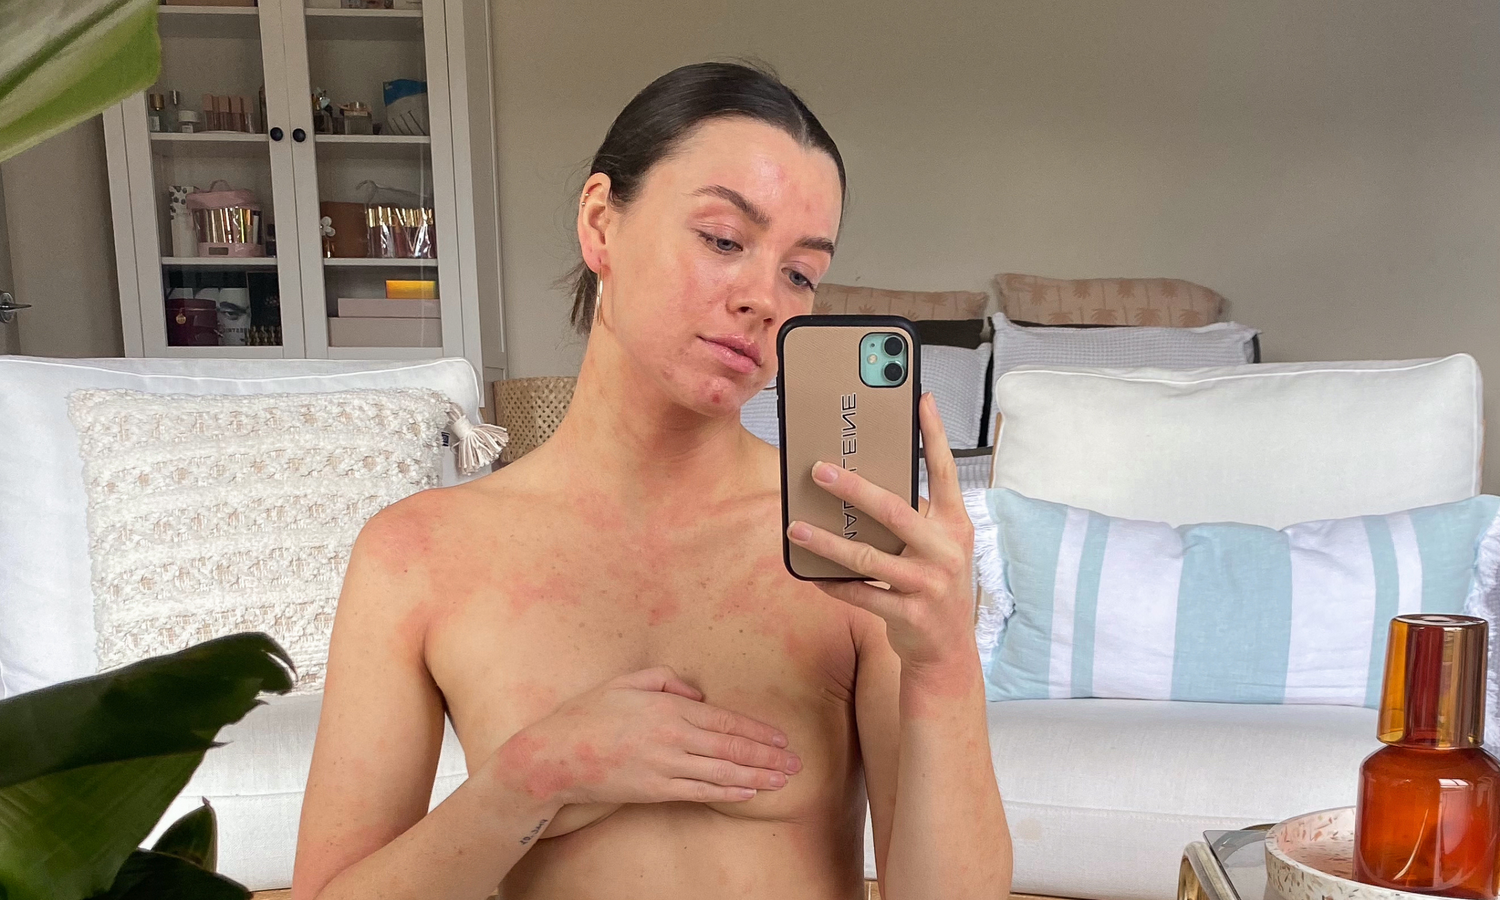 Maddie Edwards sitting with an Eczema flare up on her chest and arms.